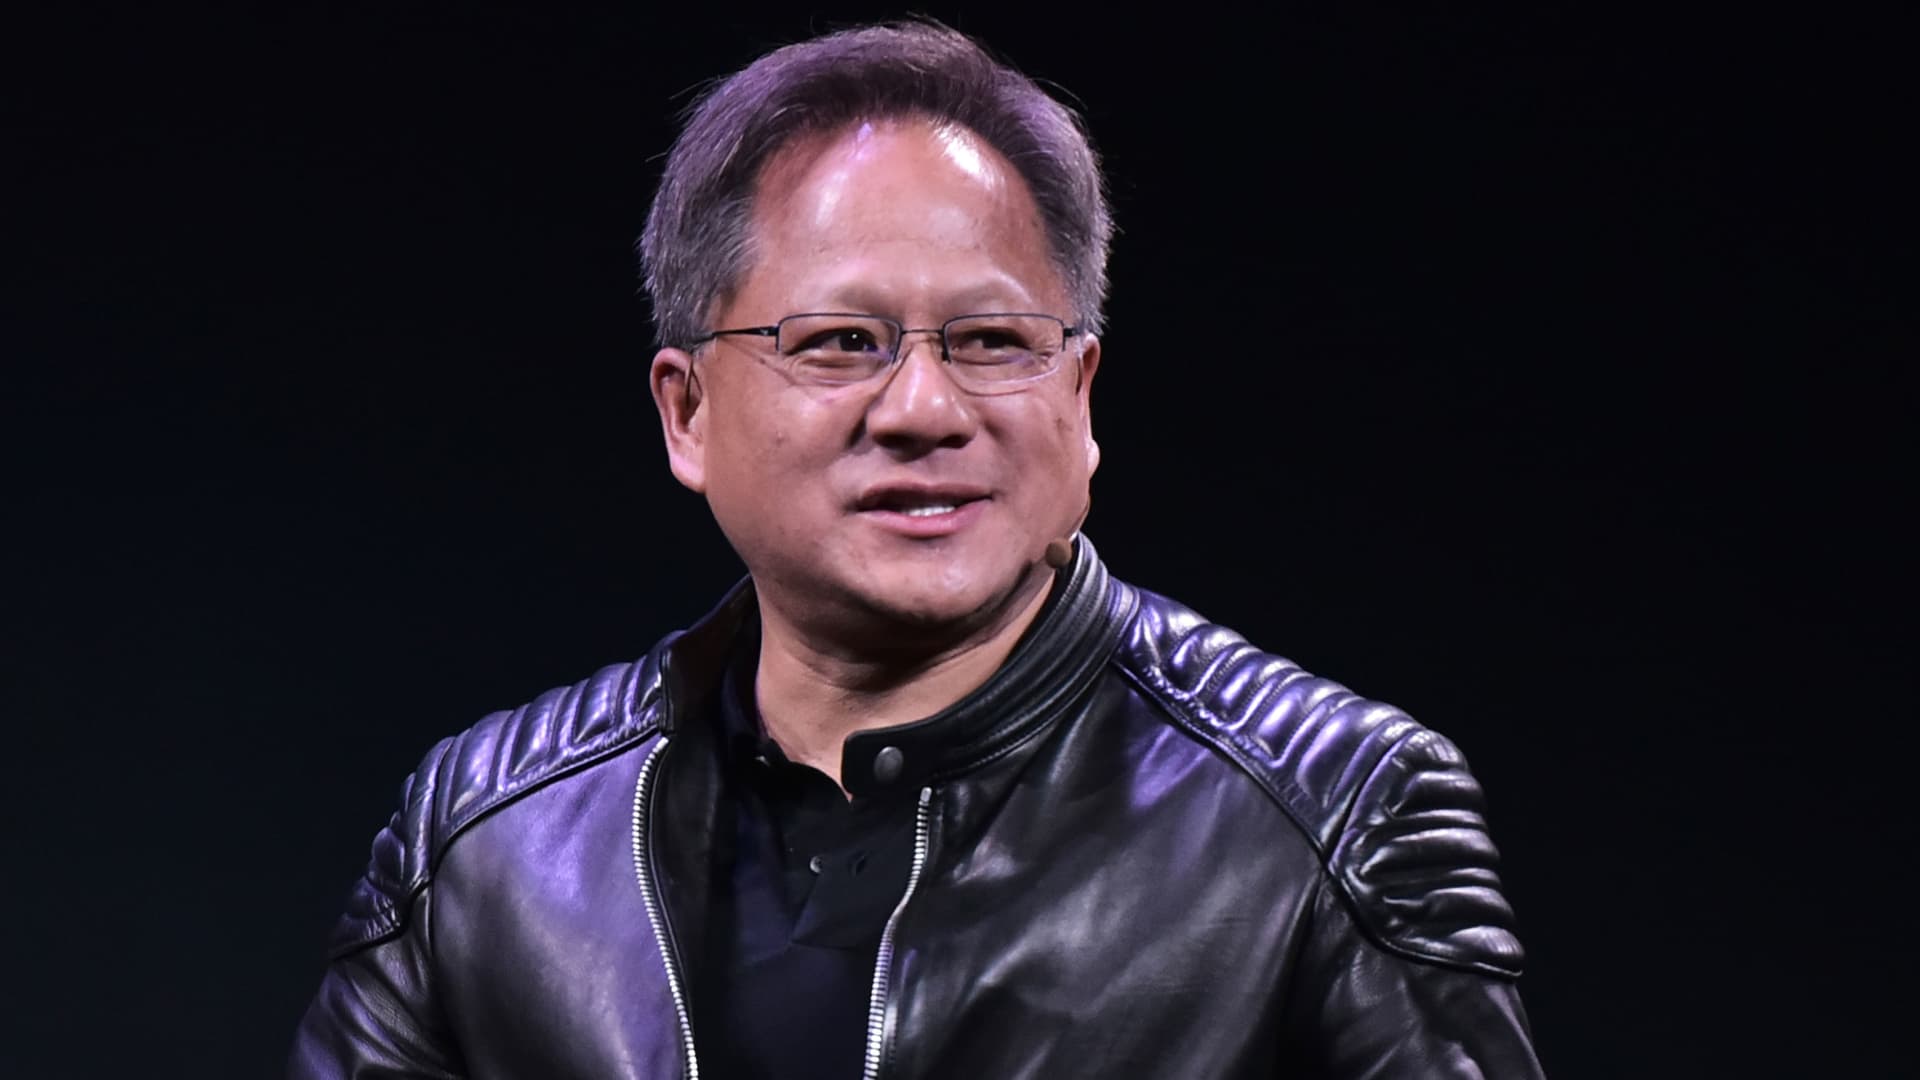 Nvidia CEO Jensen Huang shares life and work advice to younger self [Video]